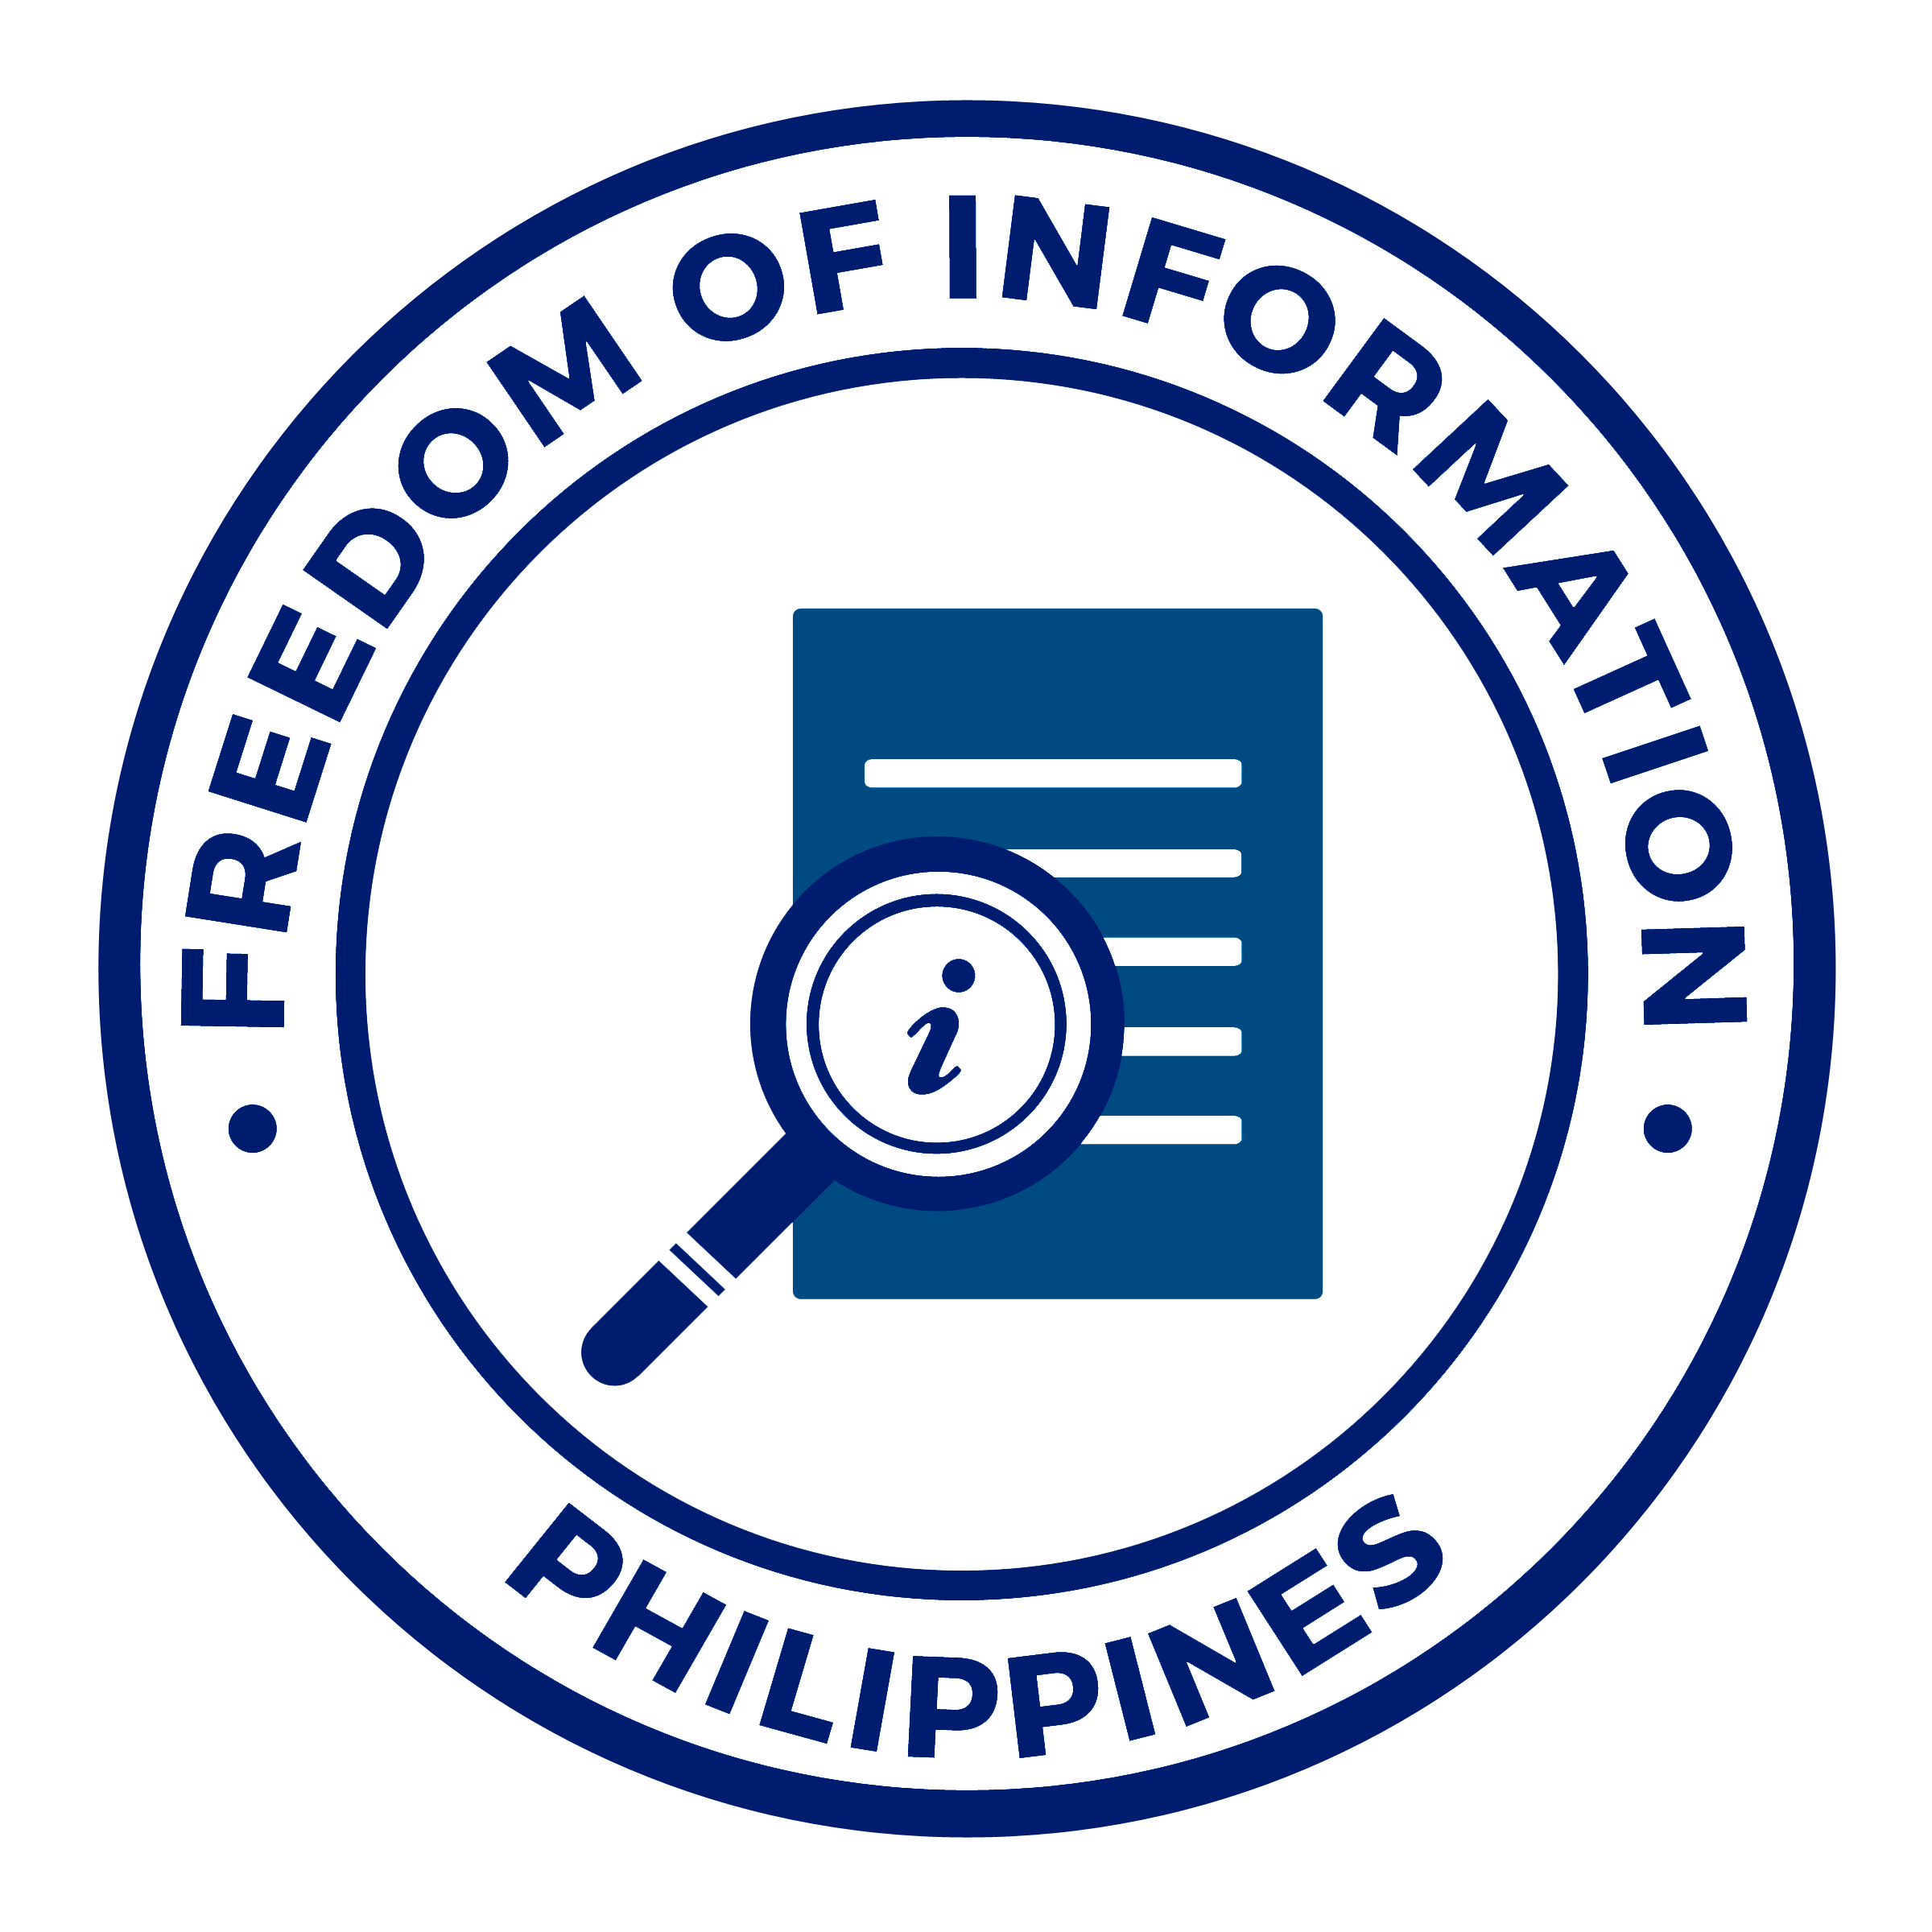 Freedom of Information